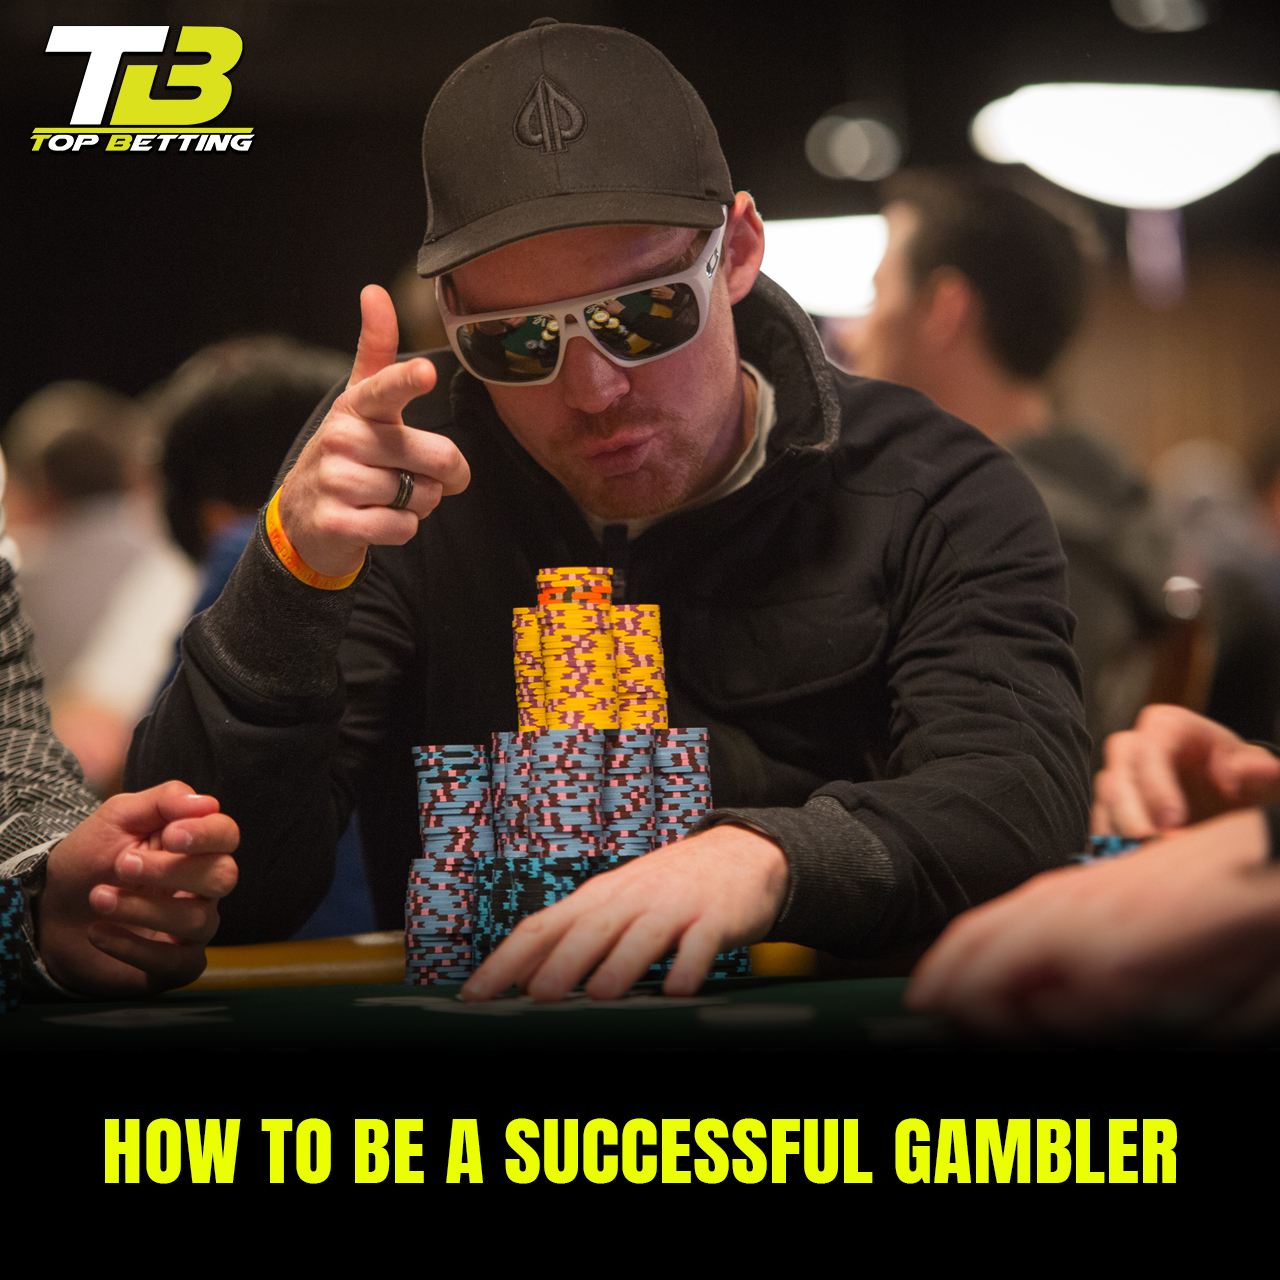 How to Be a Successful Gambler